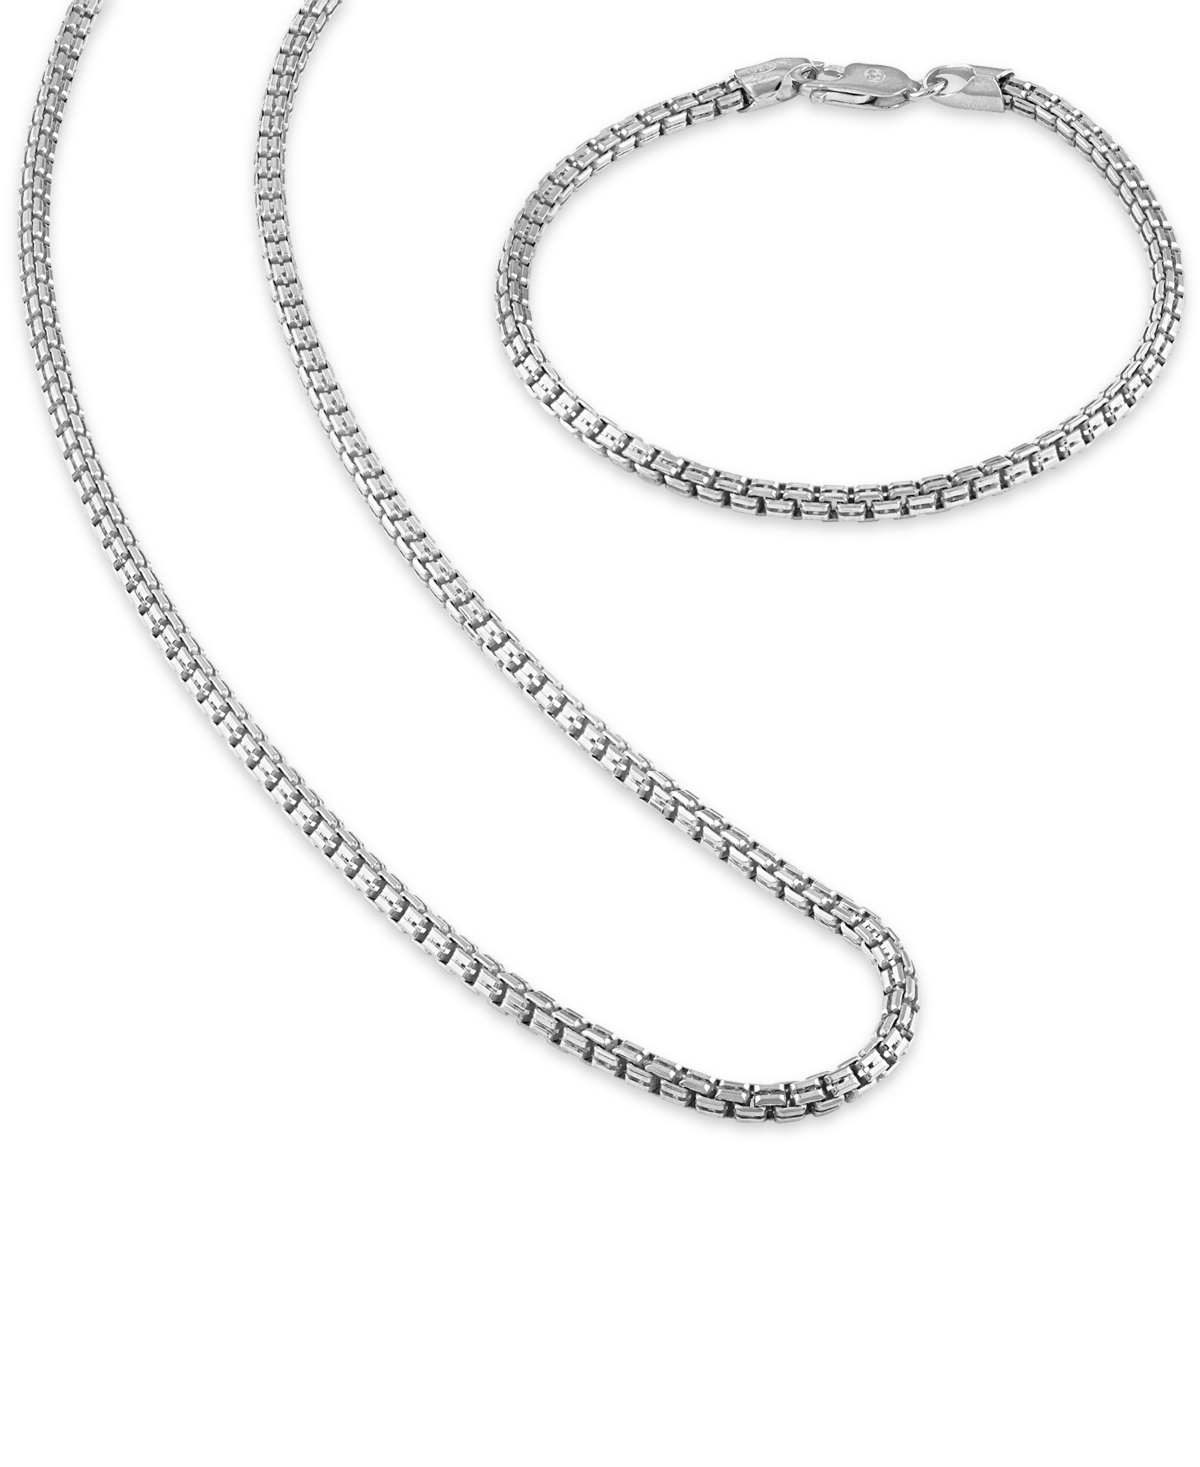 2-Pc. Set Box Link 22" Chain Necklace and Bracelet in 14k Gold-Plated Sterling Silver, Created for Macy's (Also available in Ste